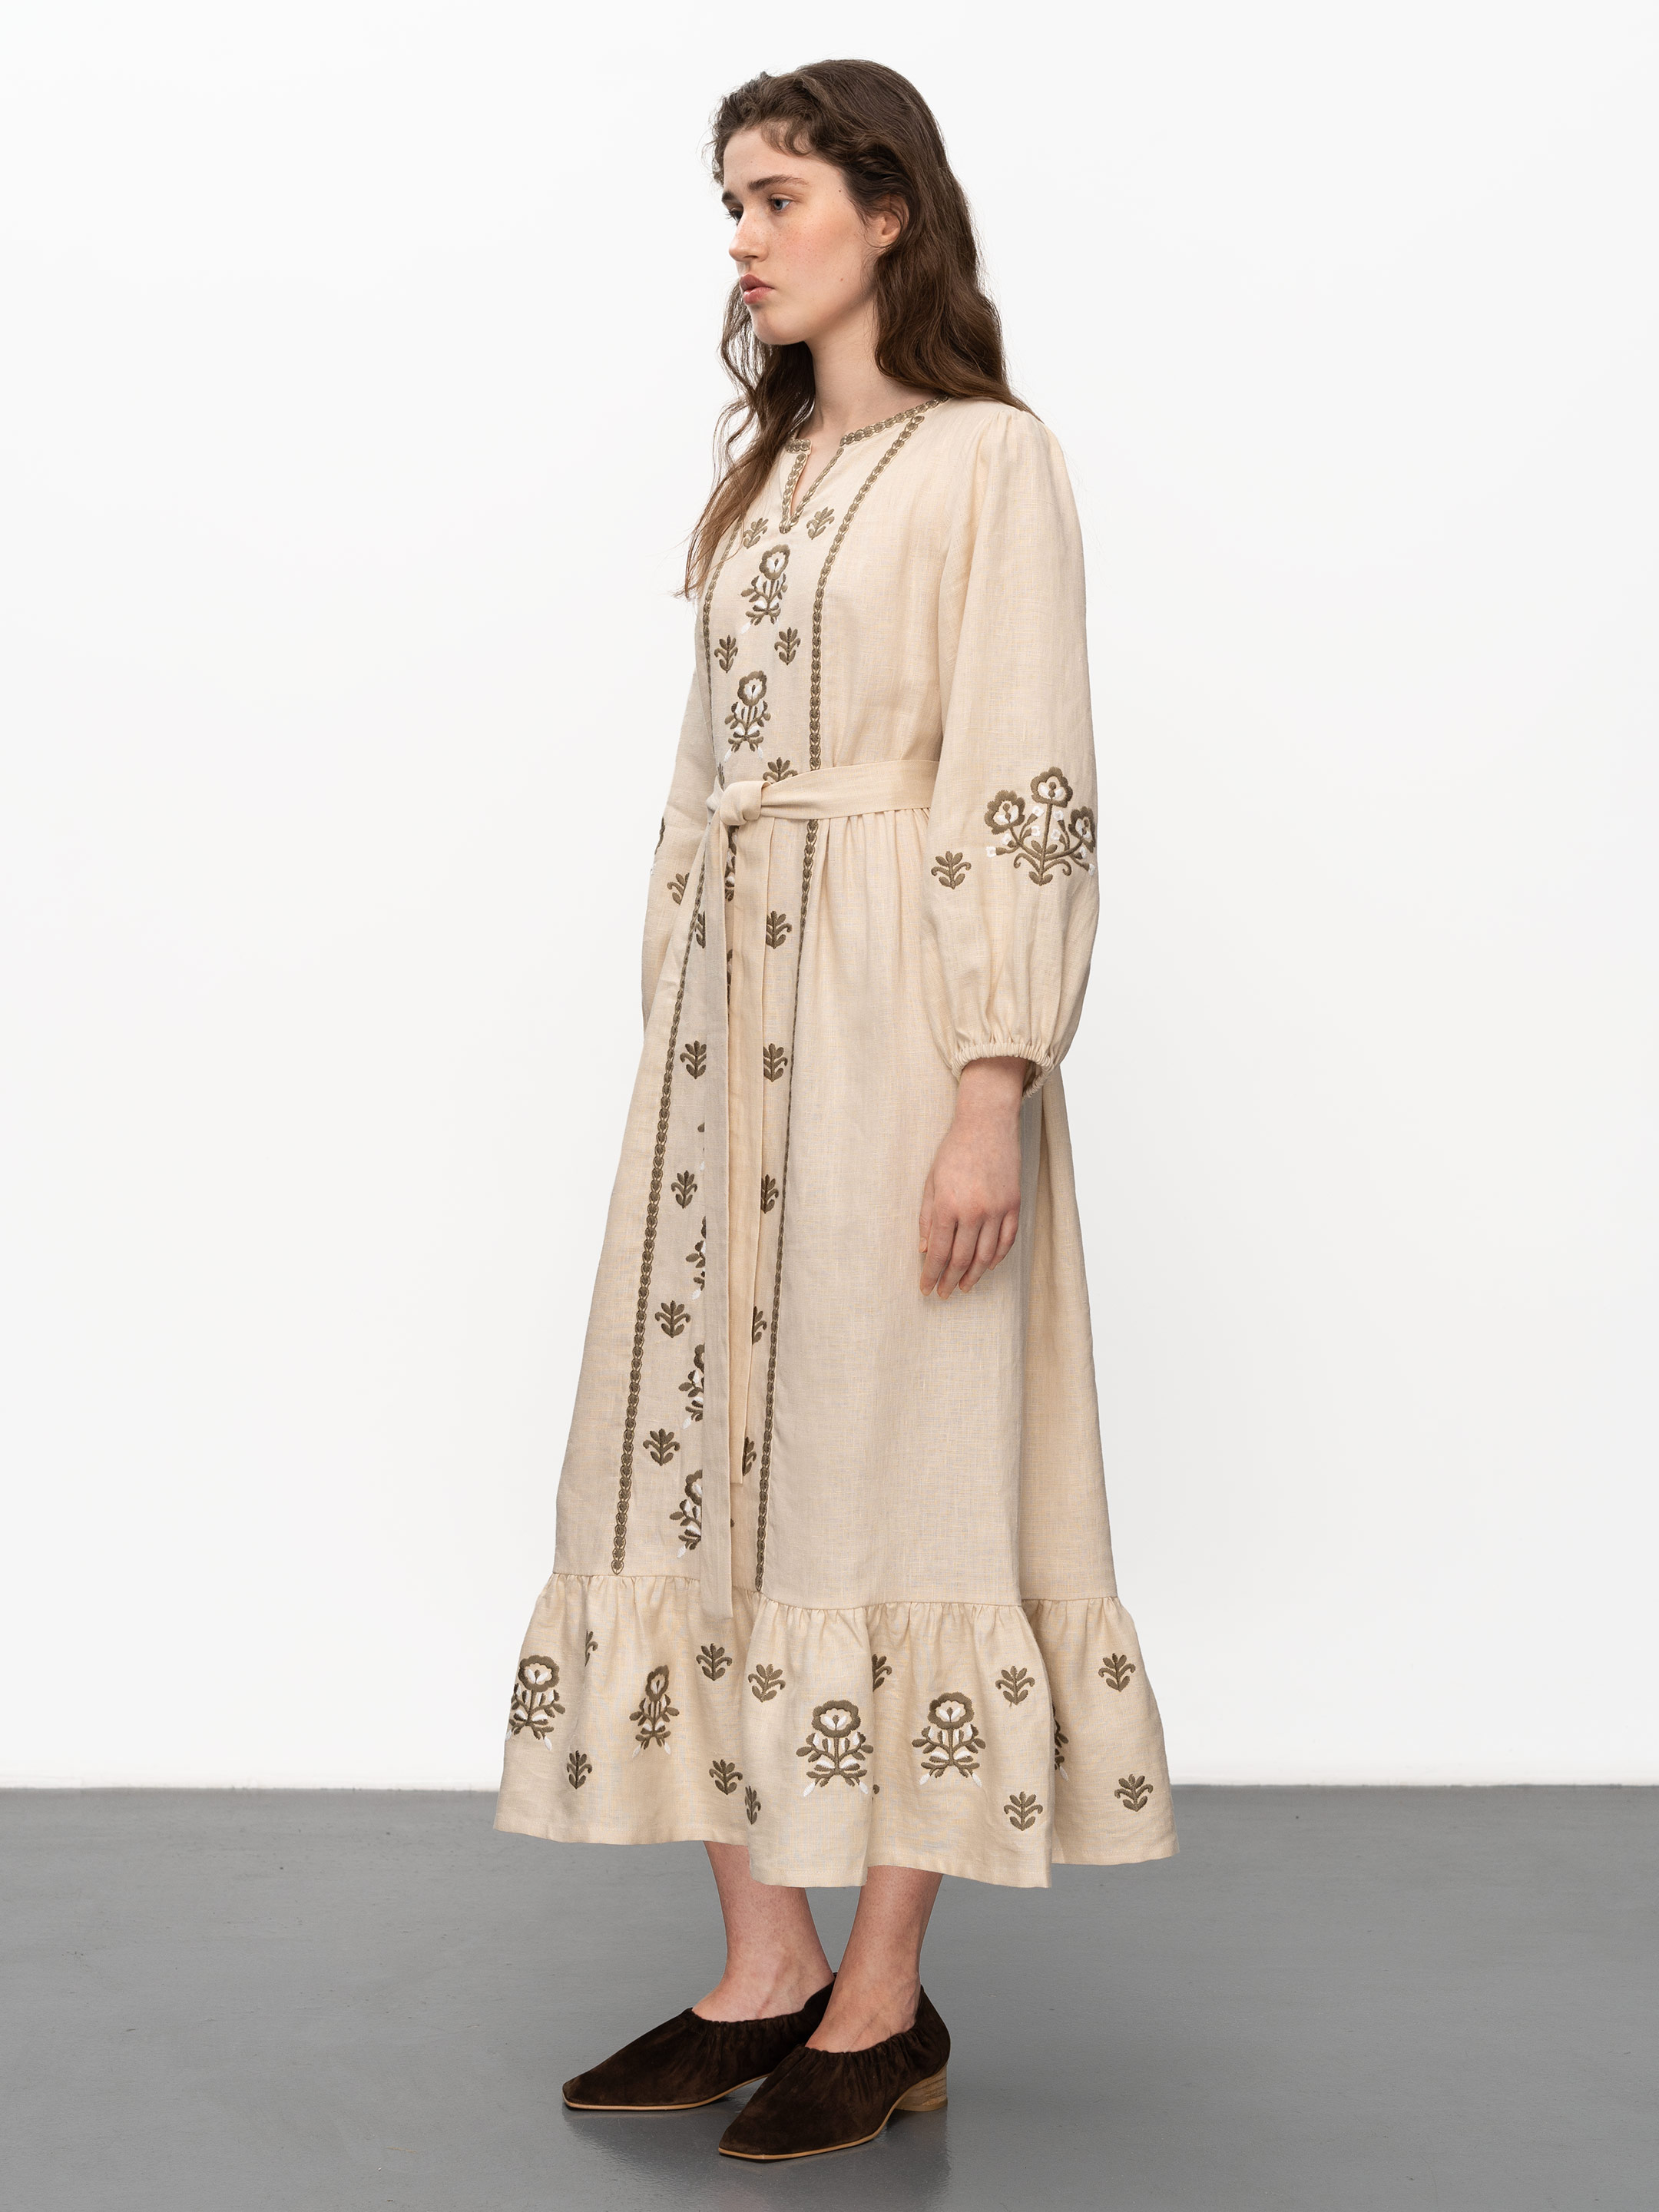 Embroidered linen dress Tranoy - photo 2